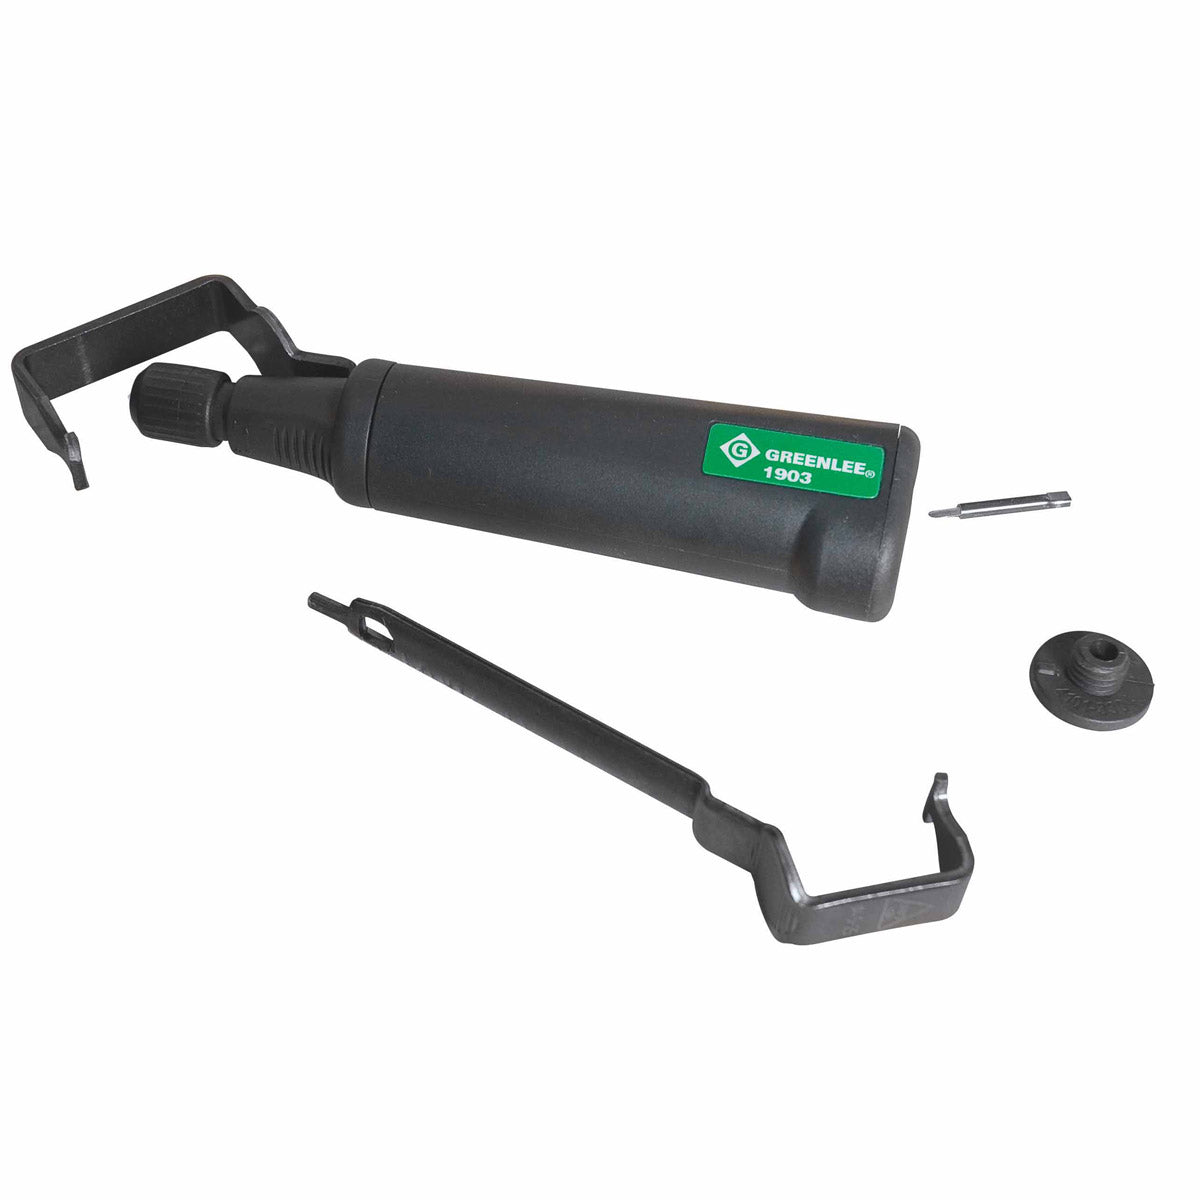 Greenlee 1903 Cable Stripping Tool